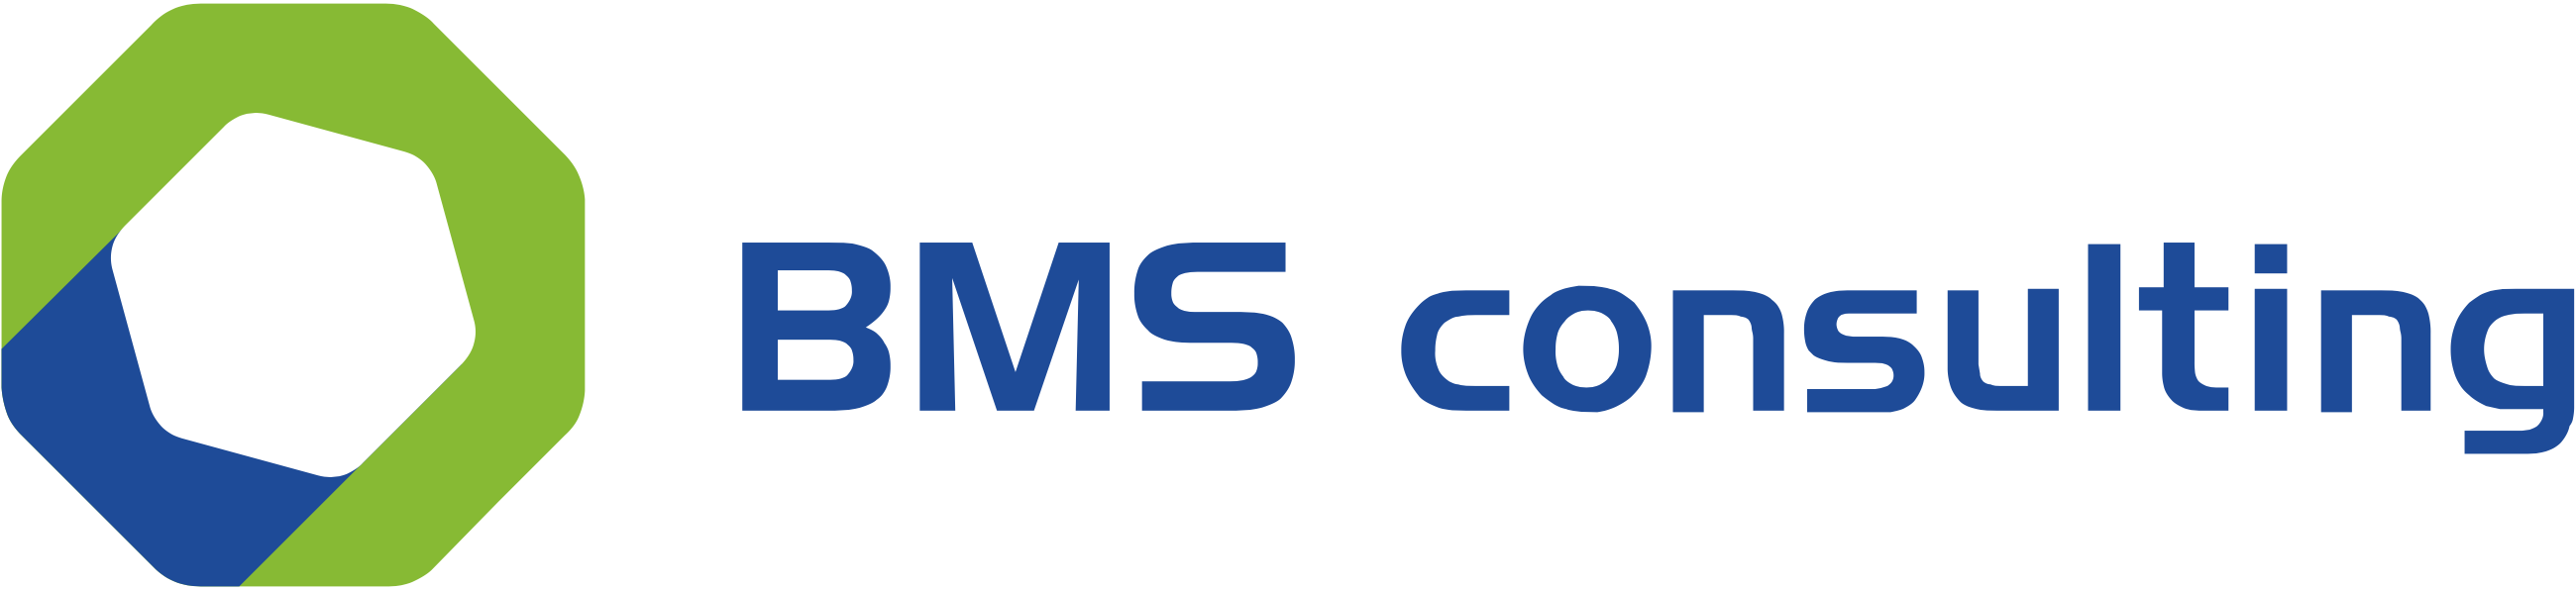 BMS Consulting